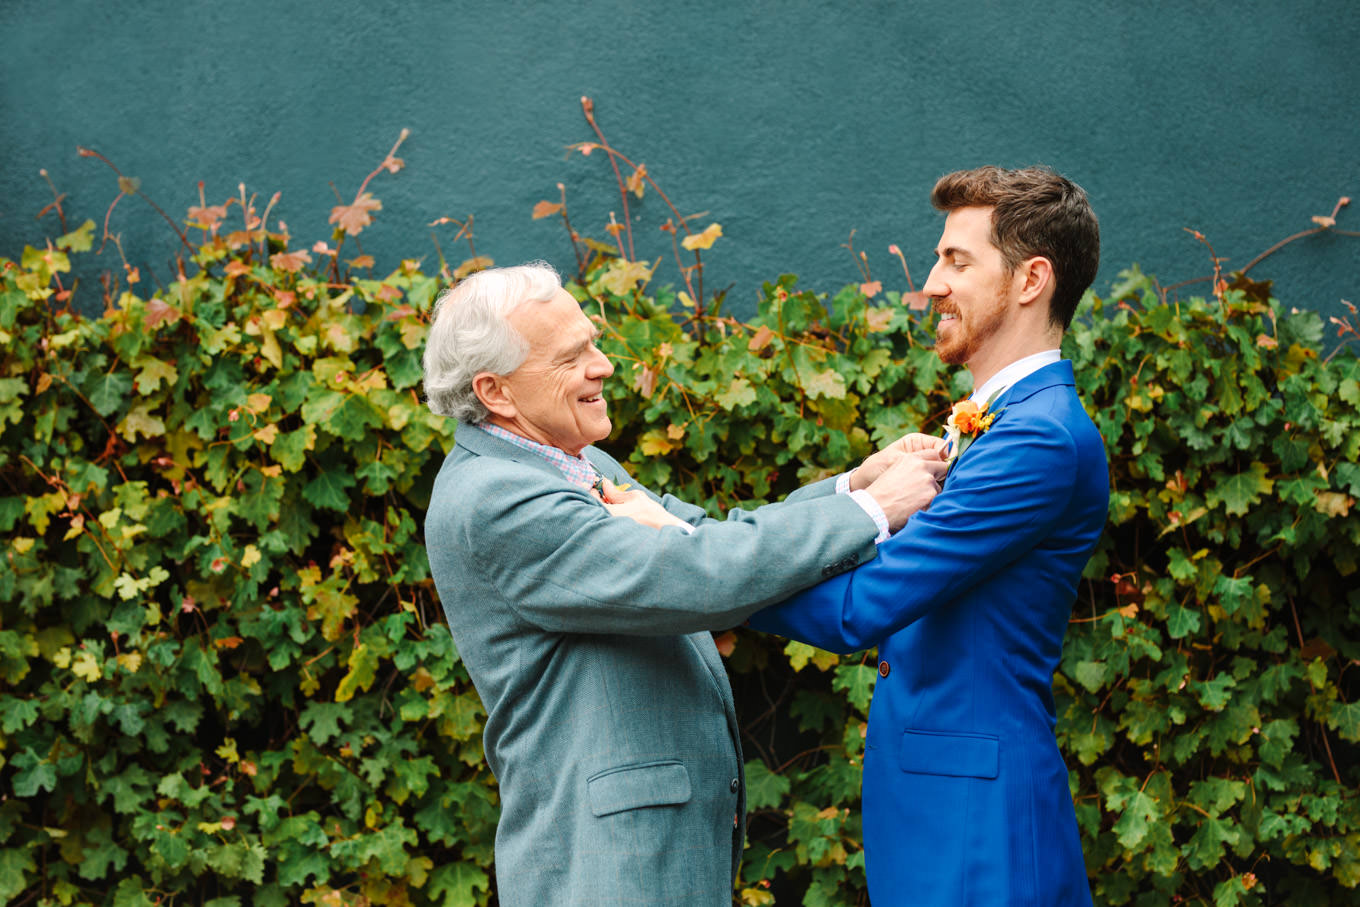 Groom and dad adjusting ties | TV inspired wedding at The Fig House Los Angeles | Published on The Knot | Fresh and colorful photography for fun-loving couples in Southern California | #losangeleswedding #TVwedding #colorfulwedding #theknot   Source: Mary Costa Photography | Los Angeles wedding photographer